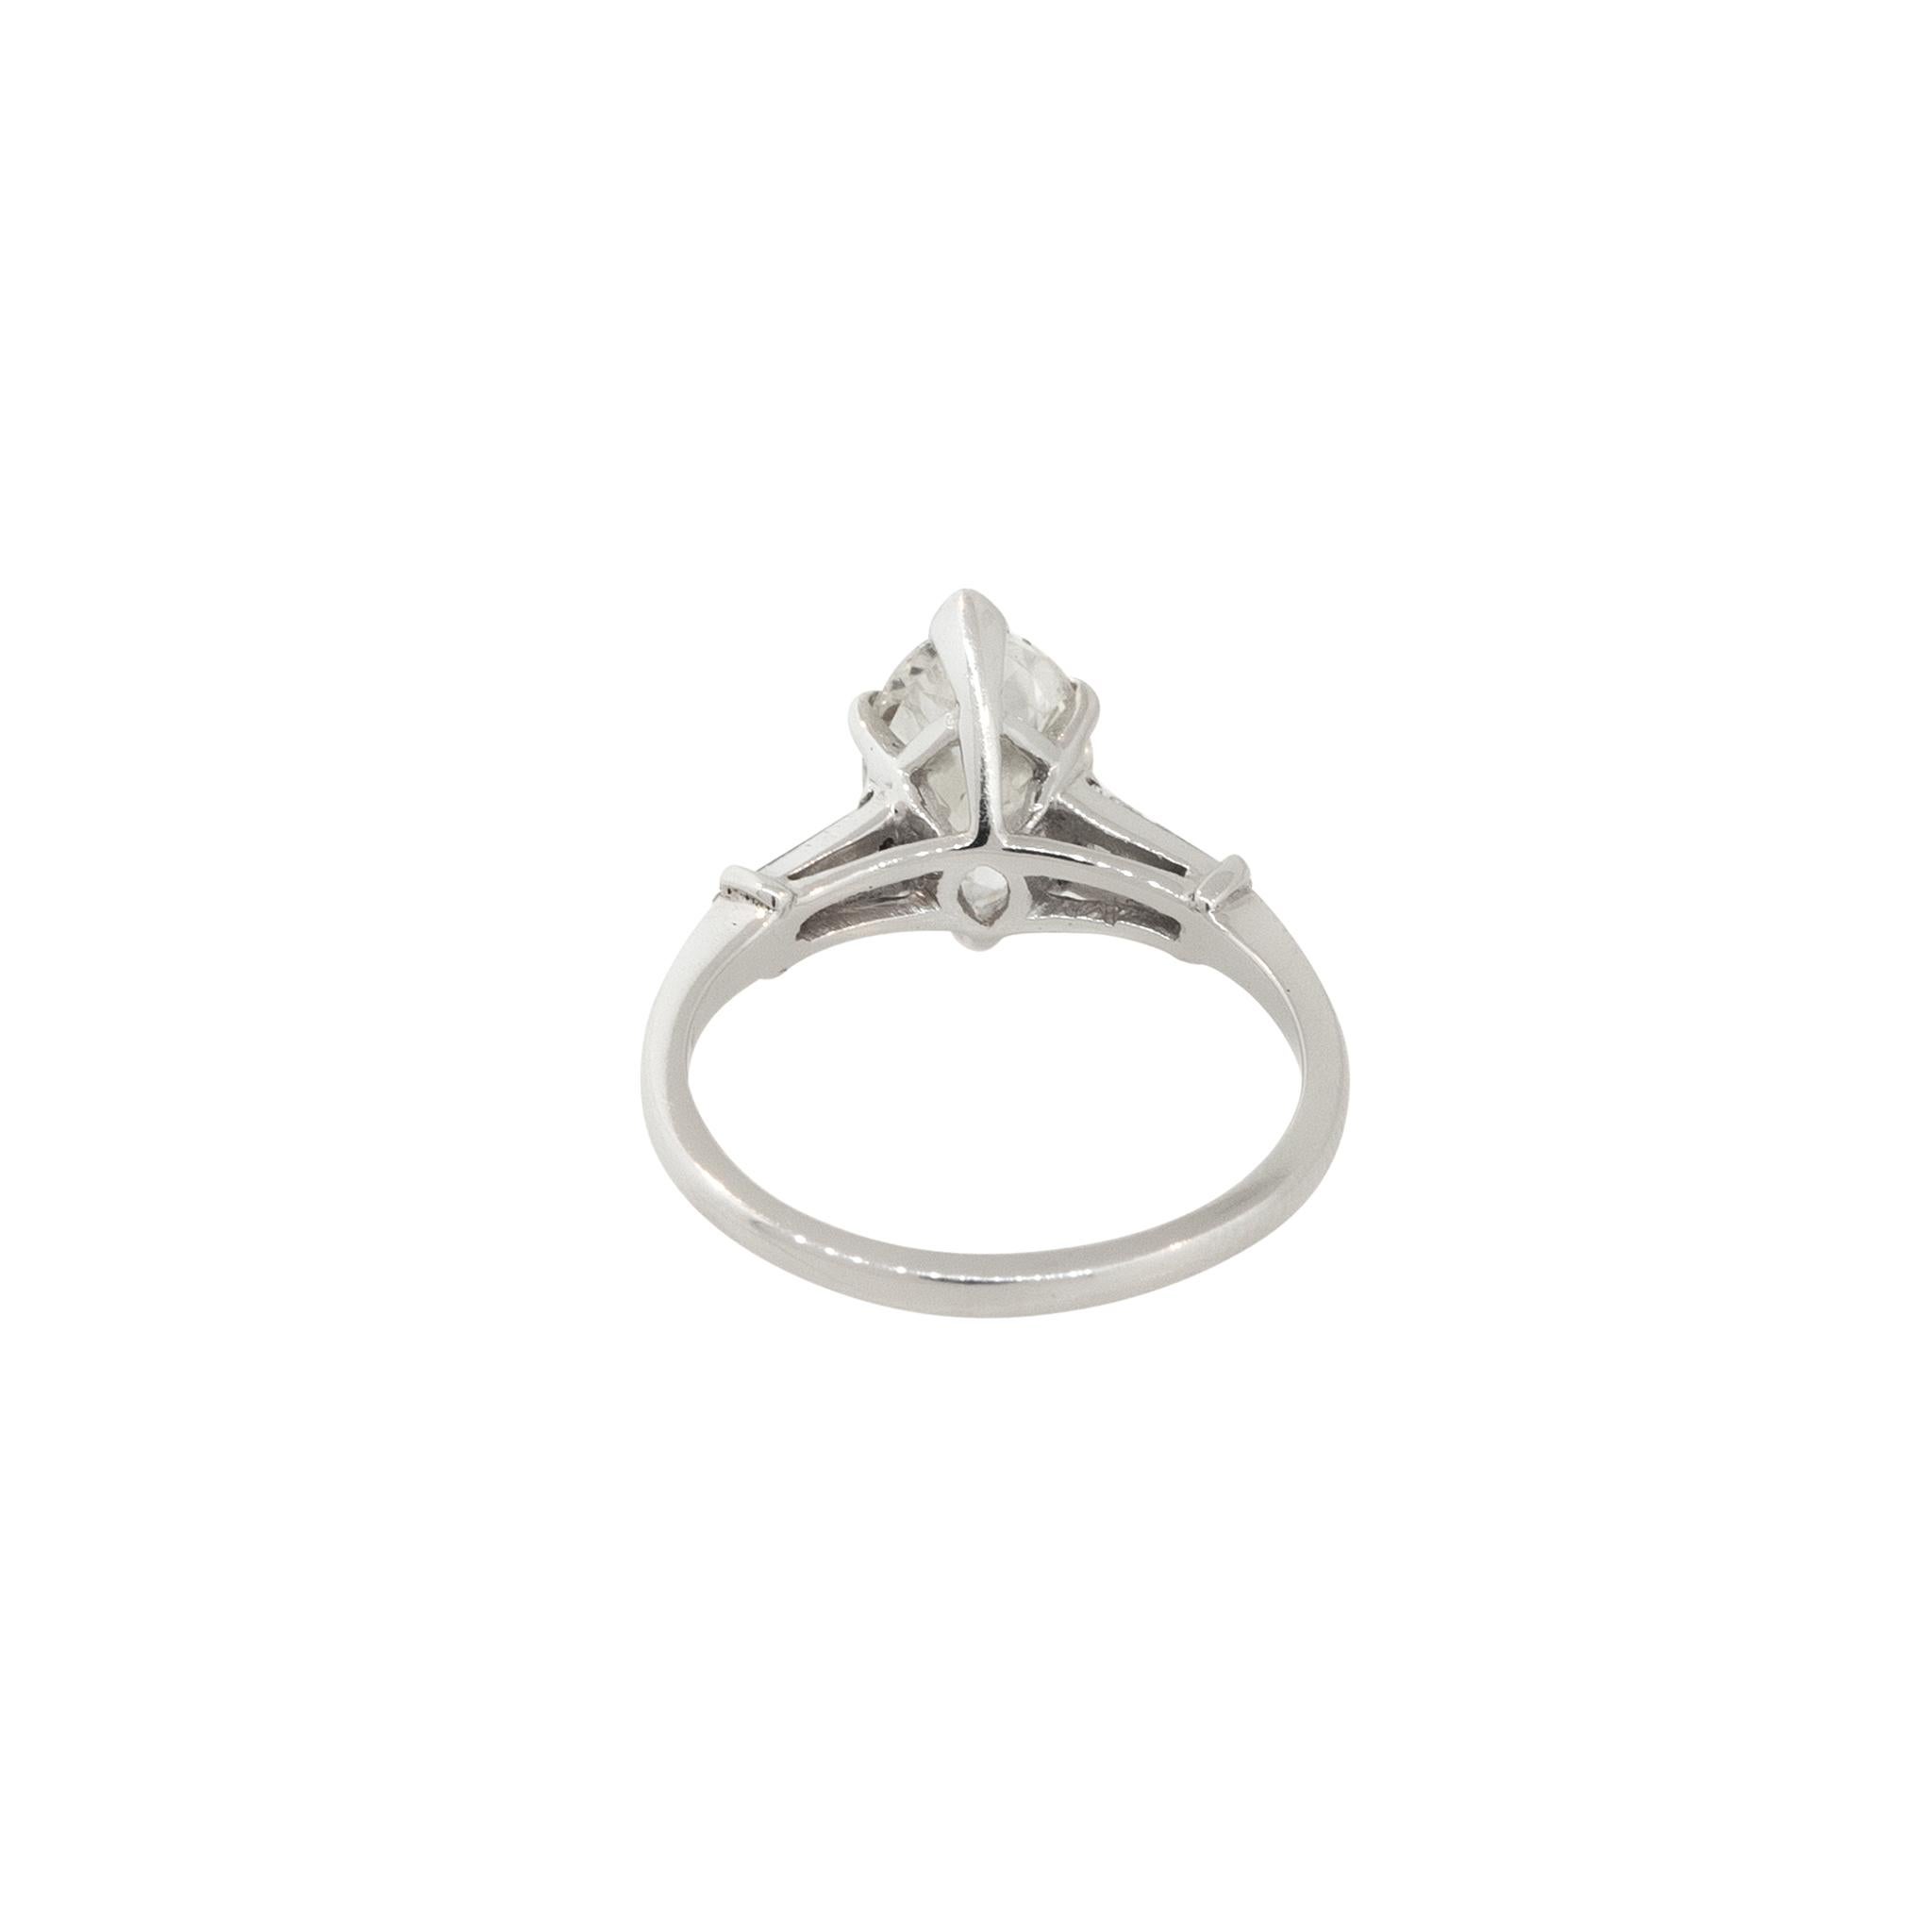 Platinum 2.10ct Marquise Diamond Engagement Ring

This Engagement Ring featuring a Marquise Cut Diamond in the center with a Baguette Cut Diamond on each side.

Material: Platinum
Style: Marquise Diamond Ring
Diamond Details: Approx. 2.10ctw